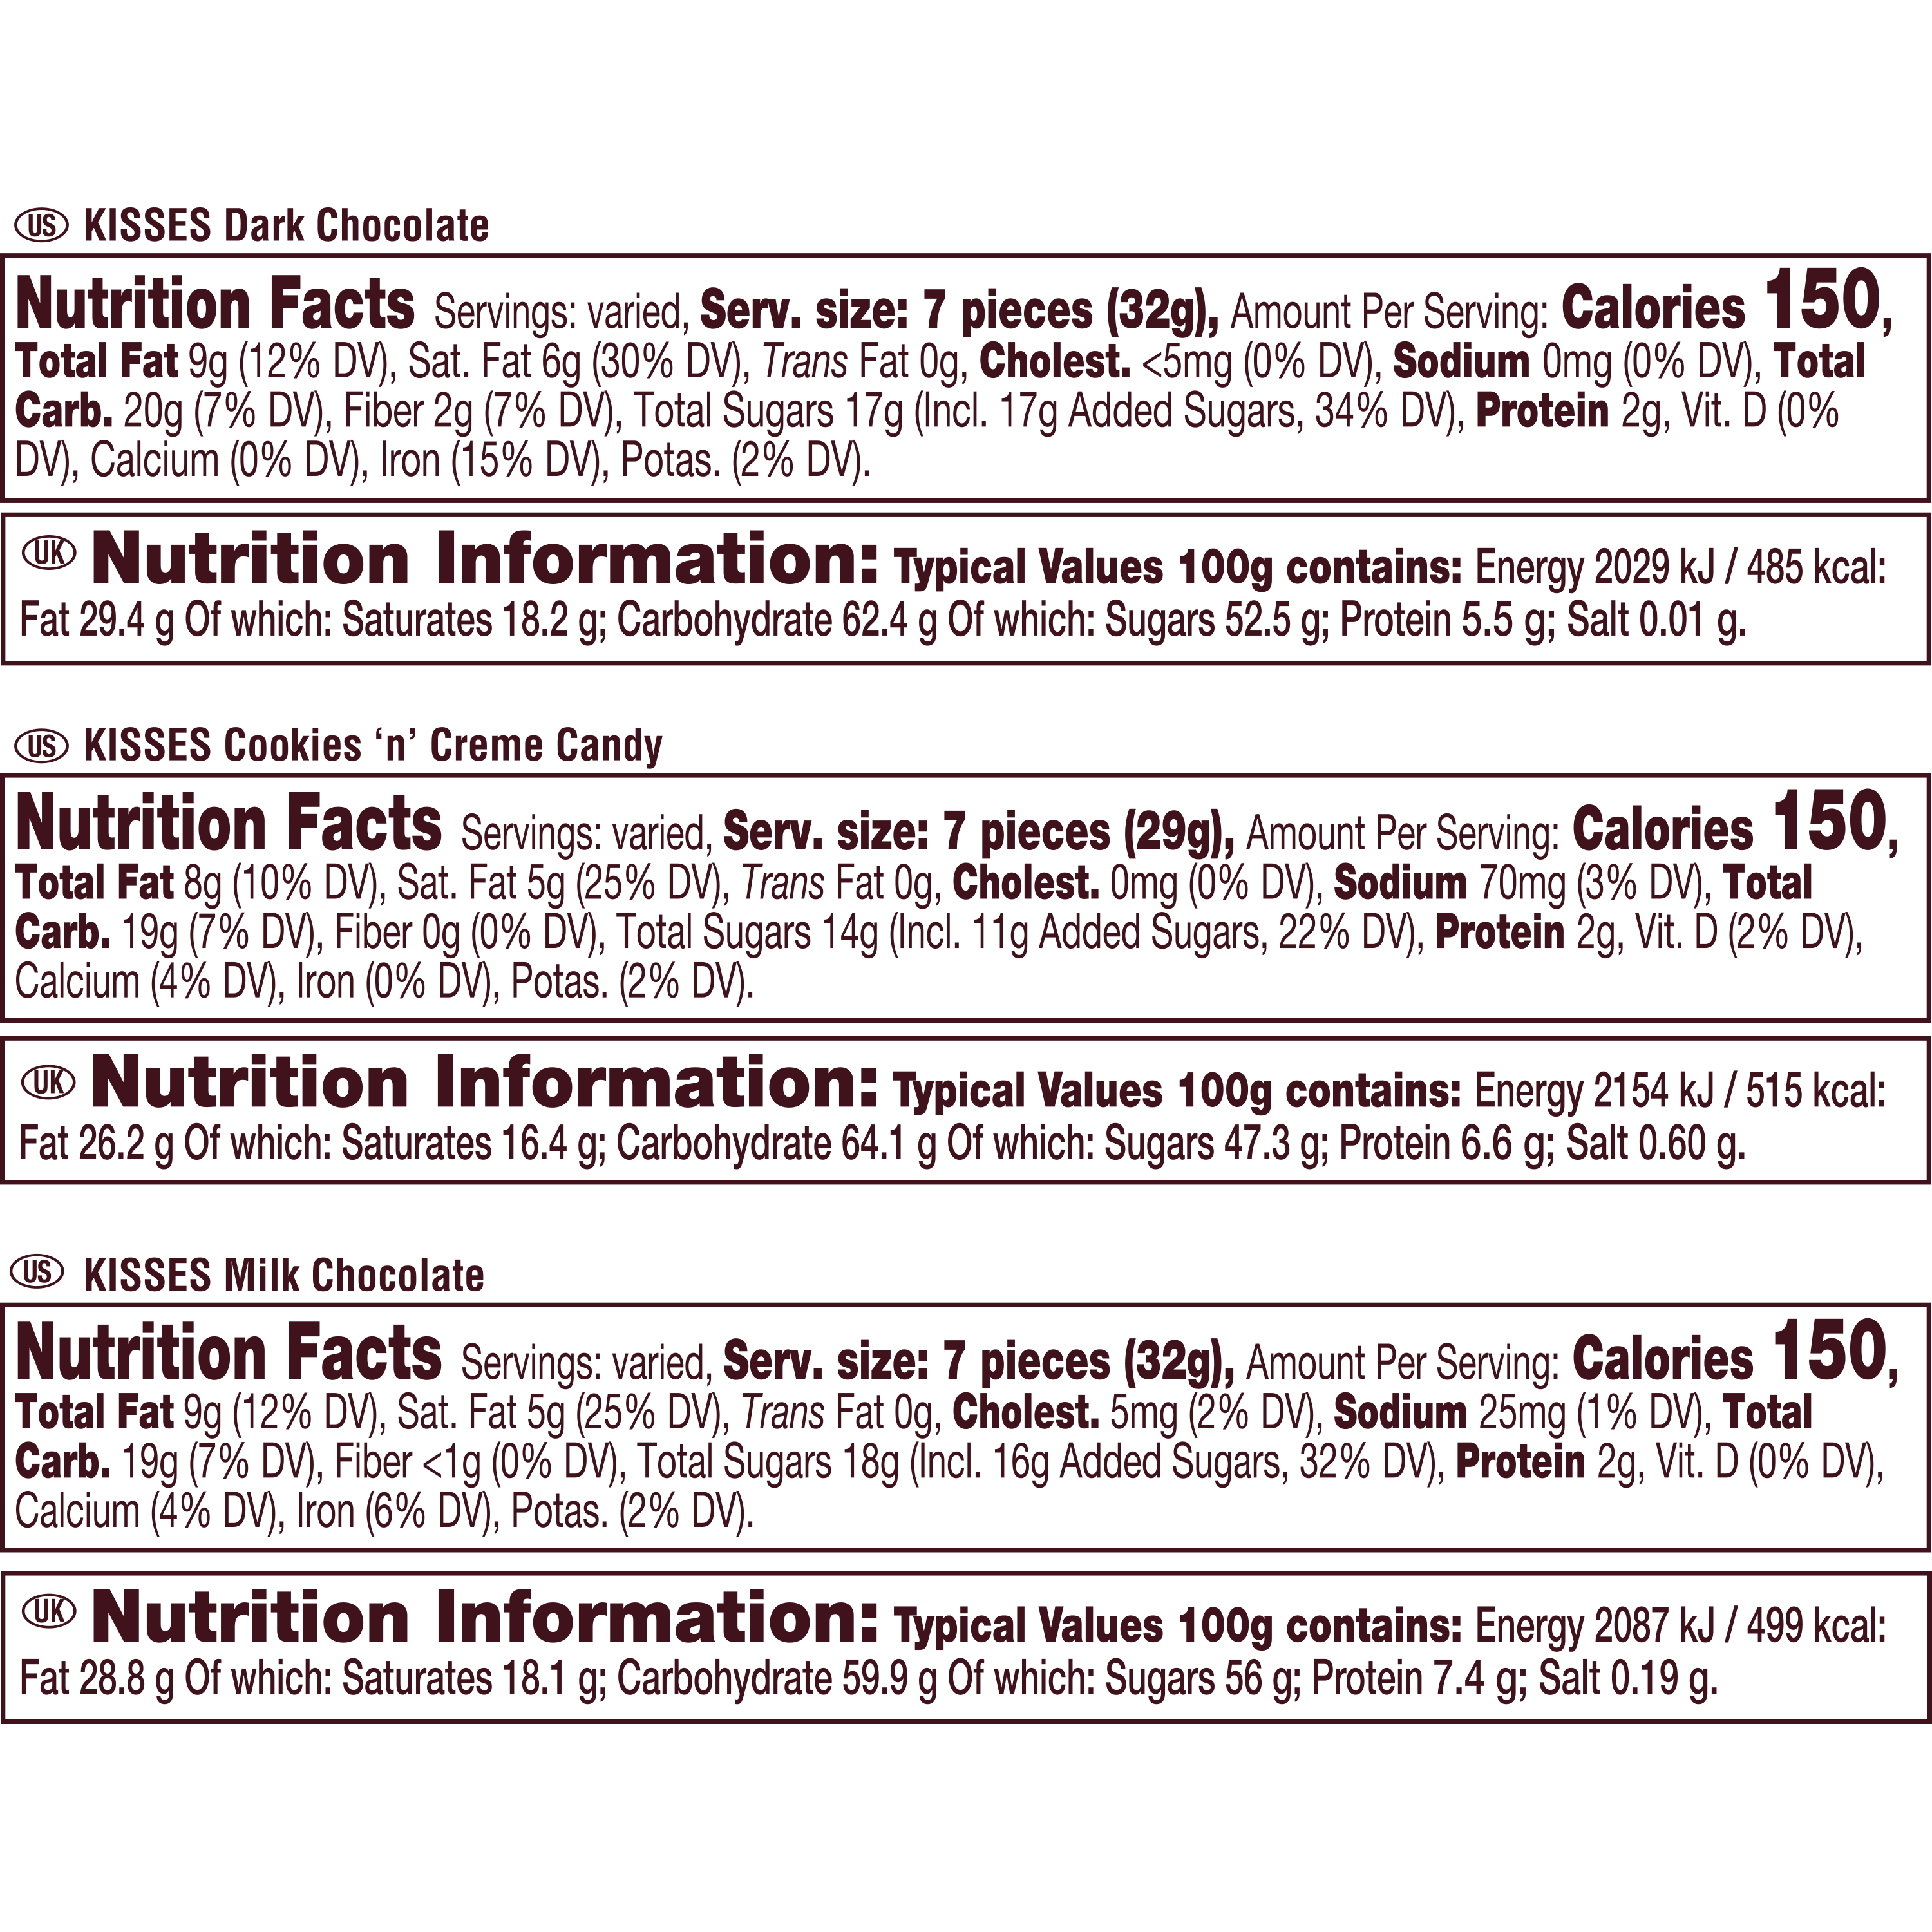 HERSHEY'S KISSES World Traveler Collection Assortment, 17.9 oz box - Nutritional Facts